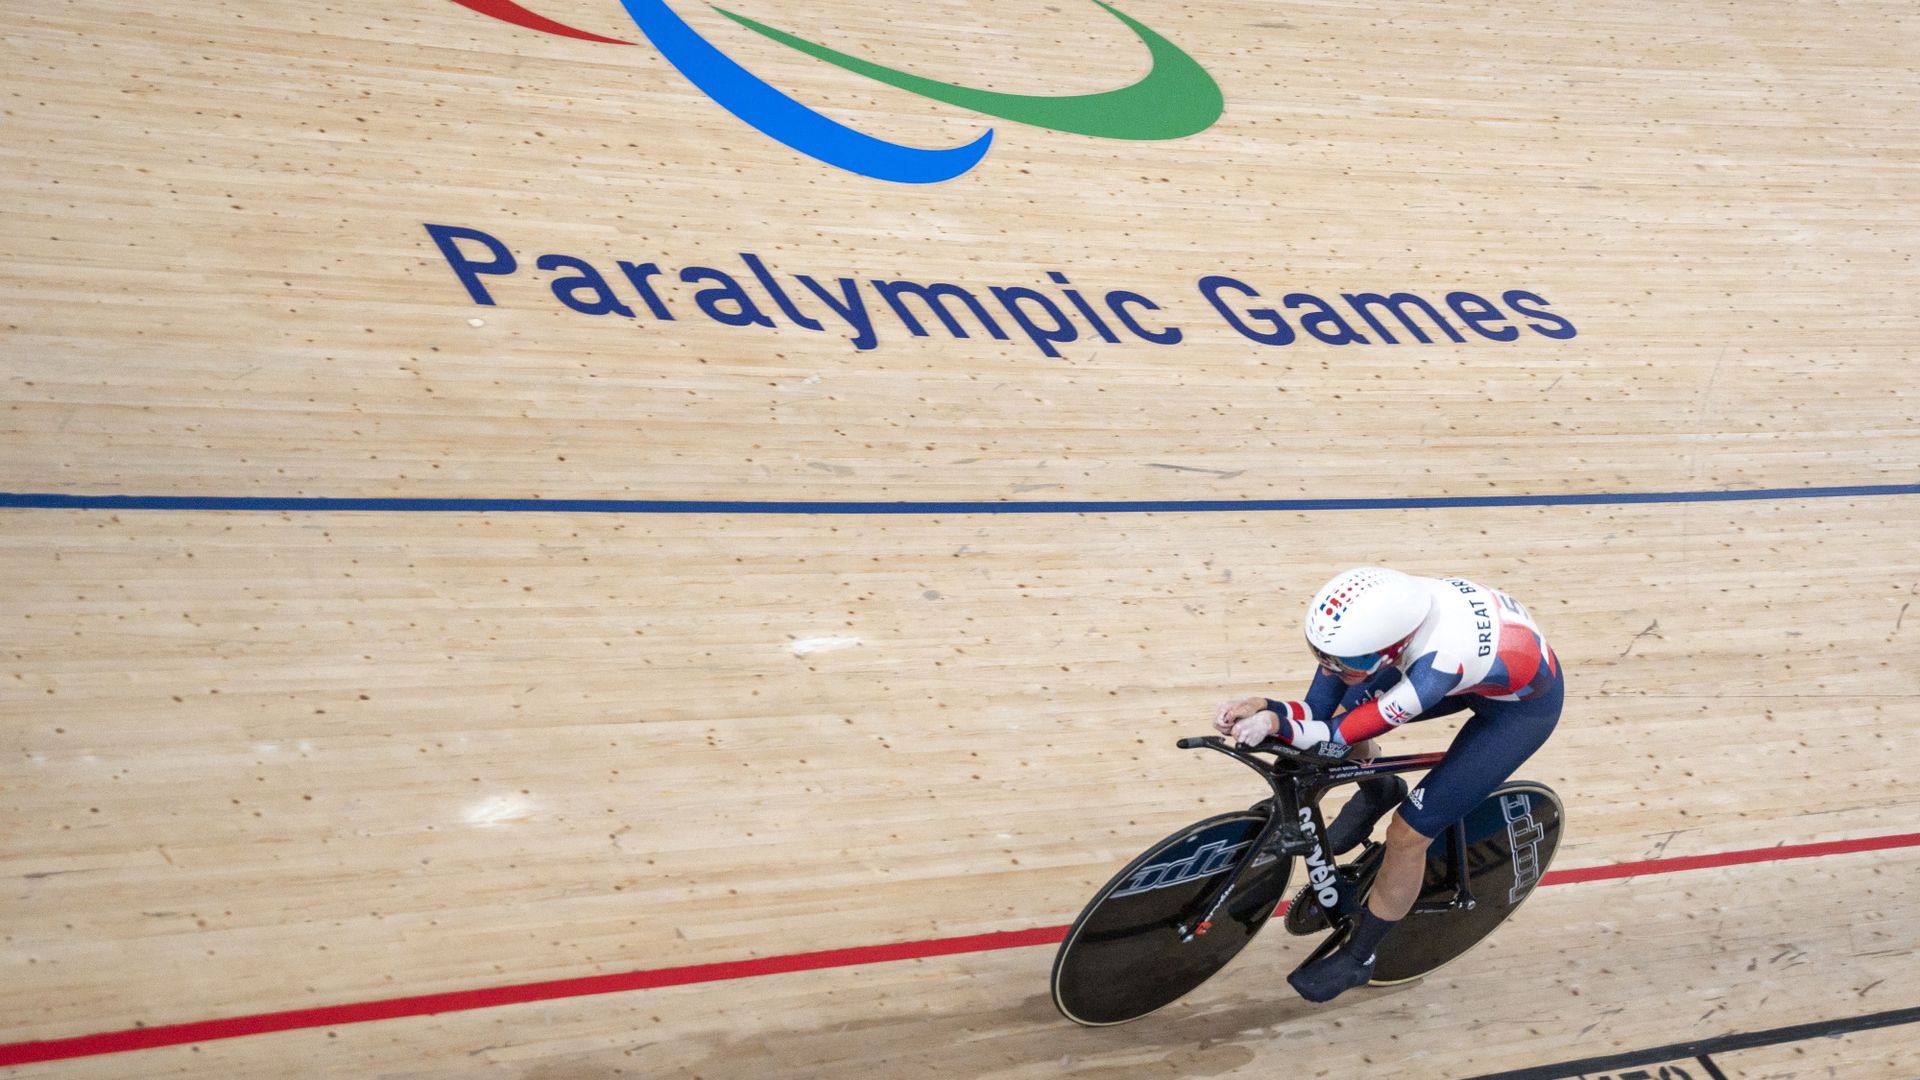 How to watch Track Cycling at Paralympics 2020 live stream, key dates